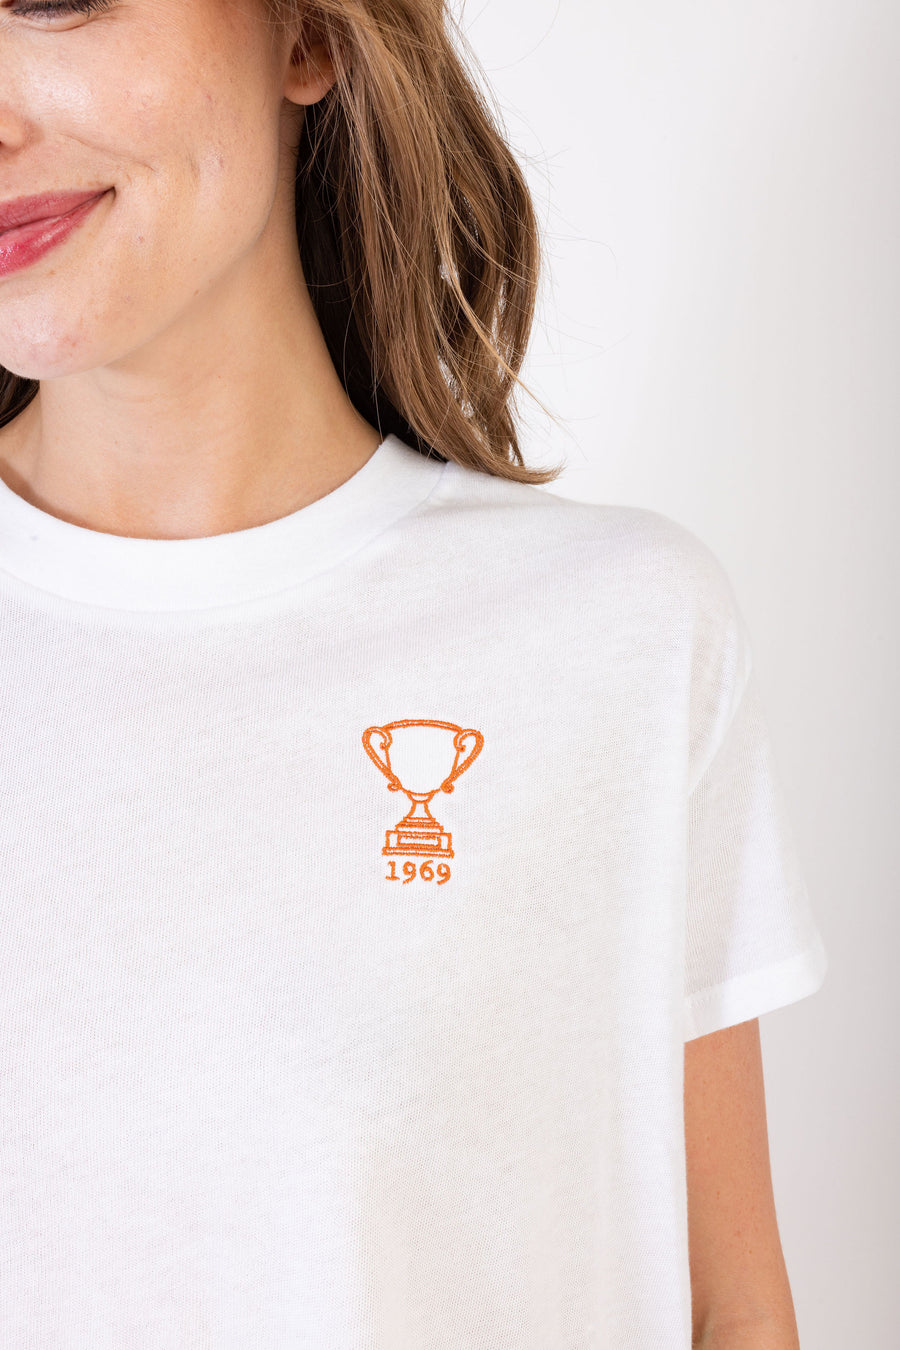 Cropped White Tee - Trophy Edition